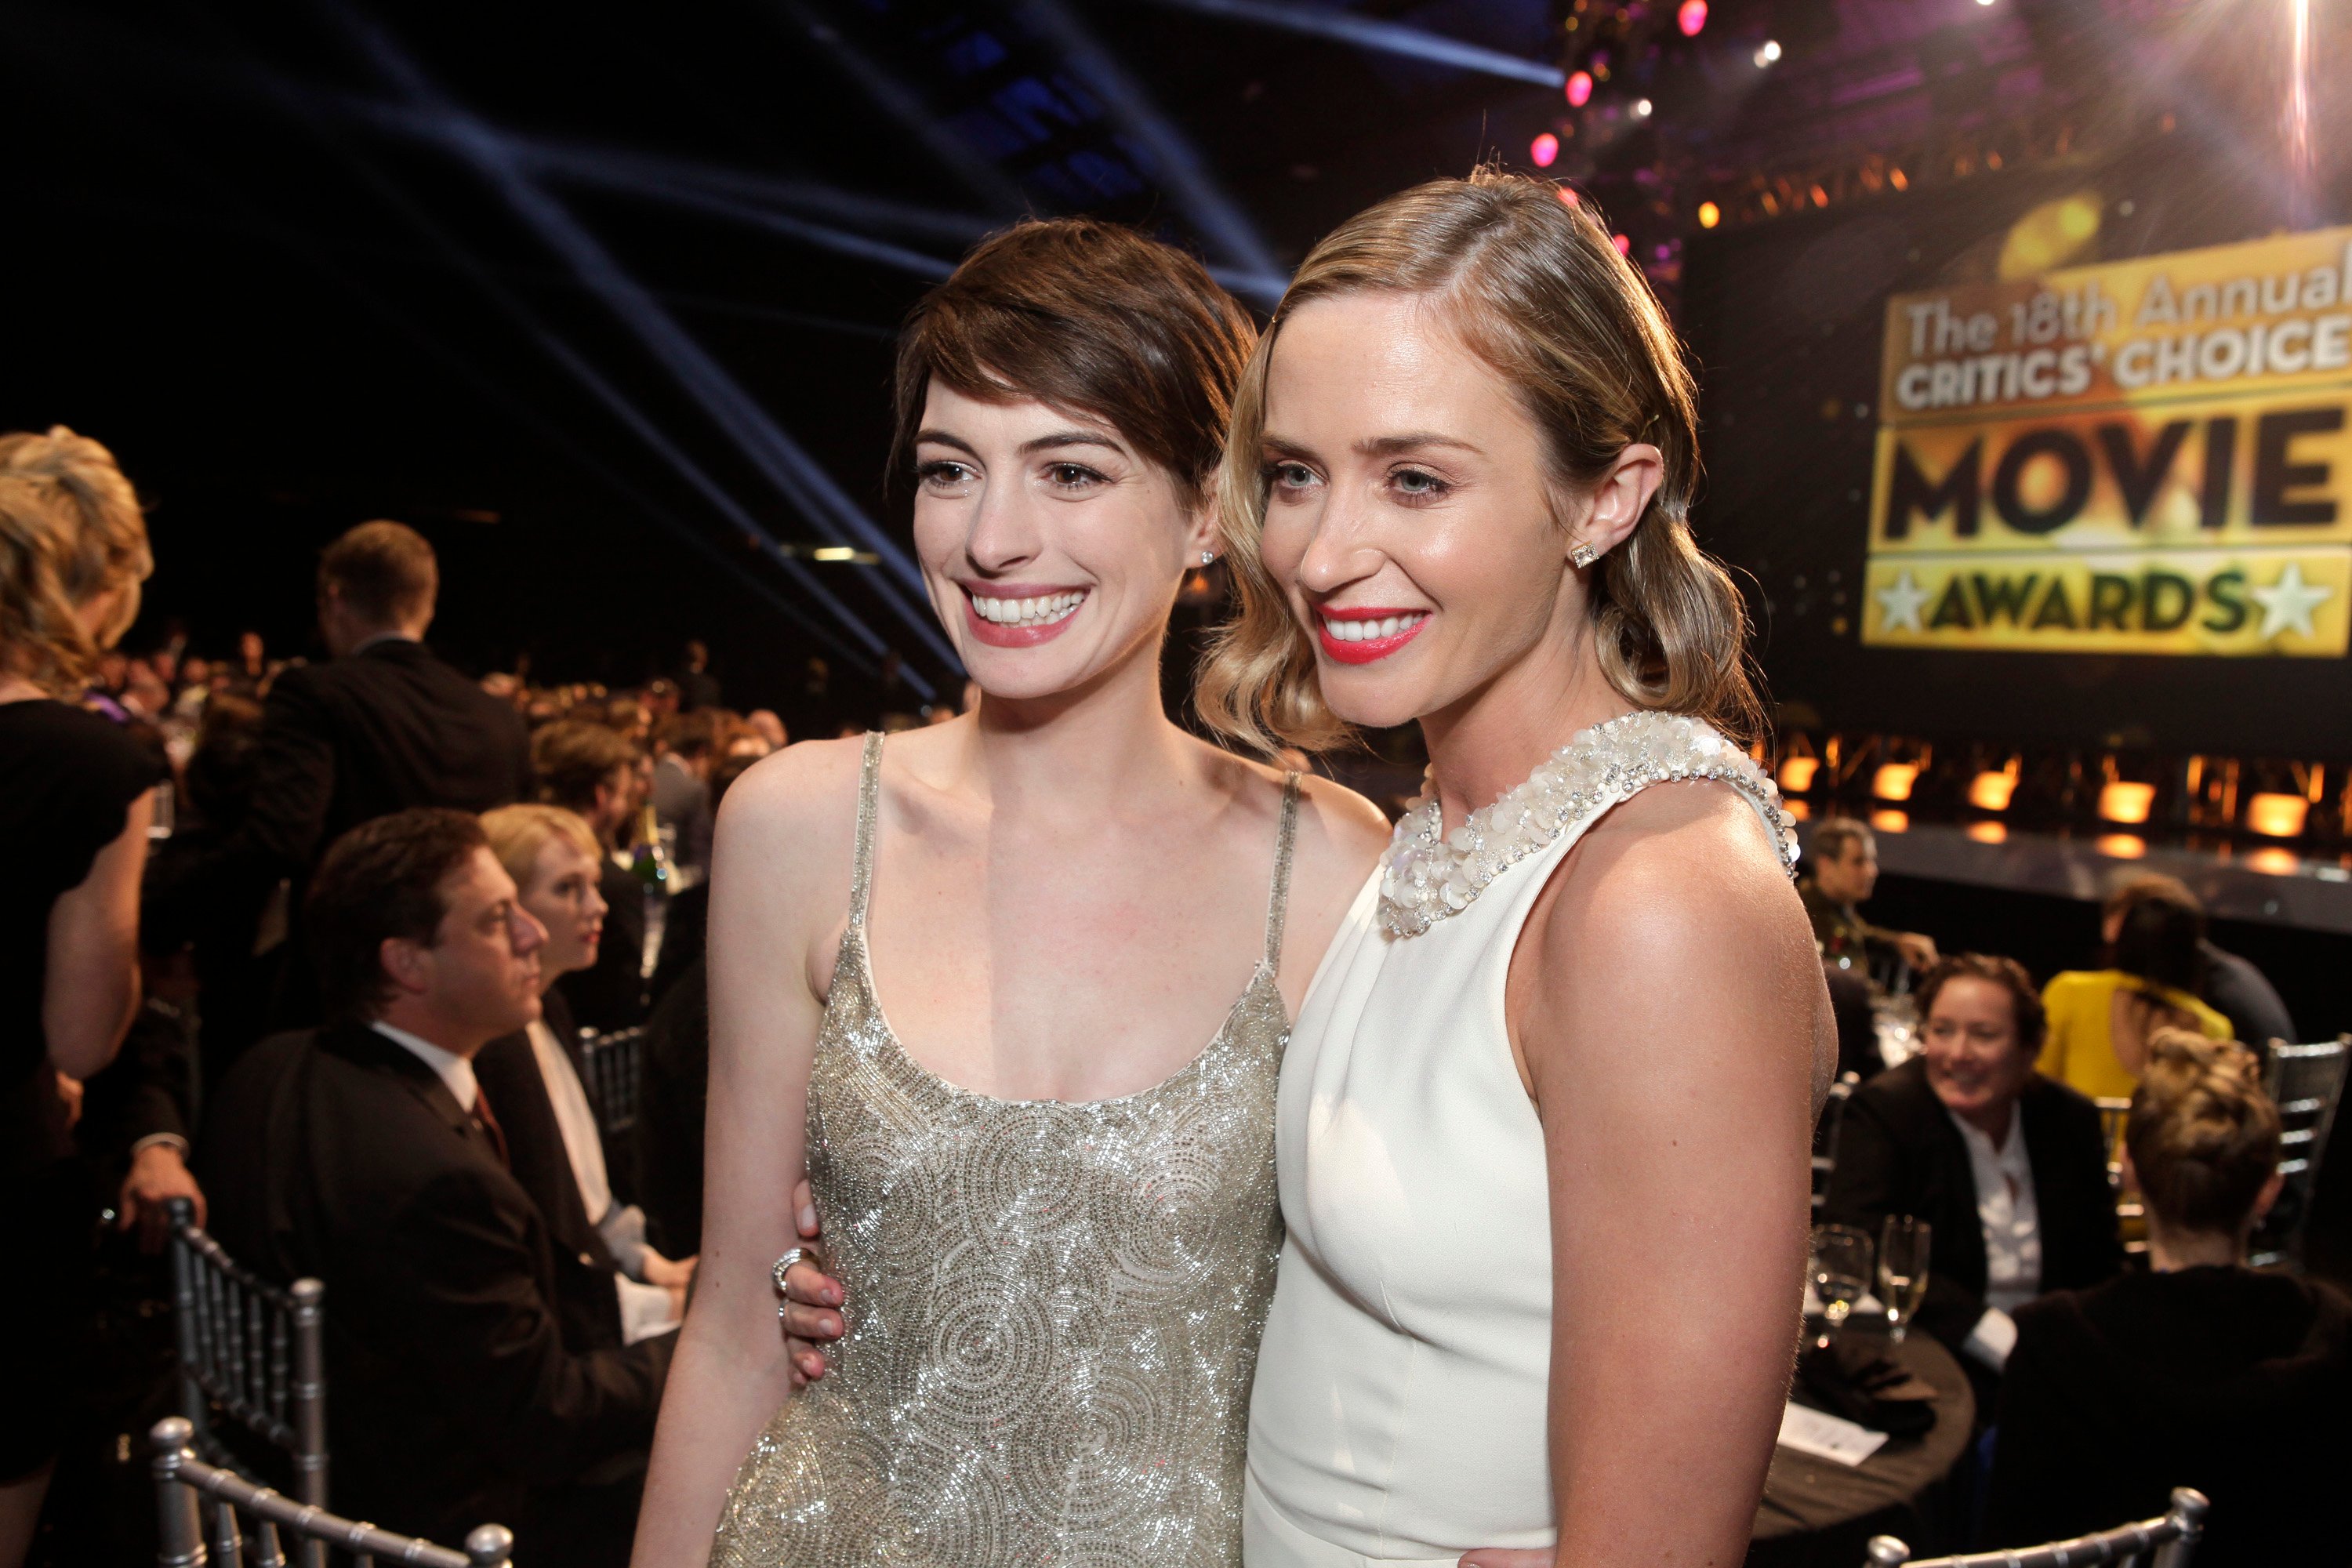 Anne Hathaway and Emily Blunt attend the Critics' Choice Movie Awards, posing for a picture together